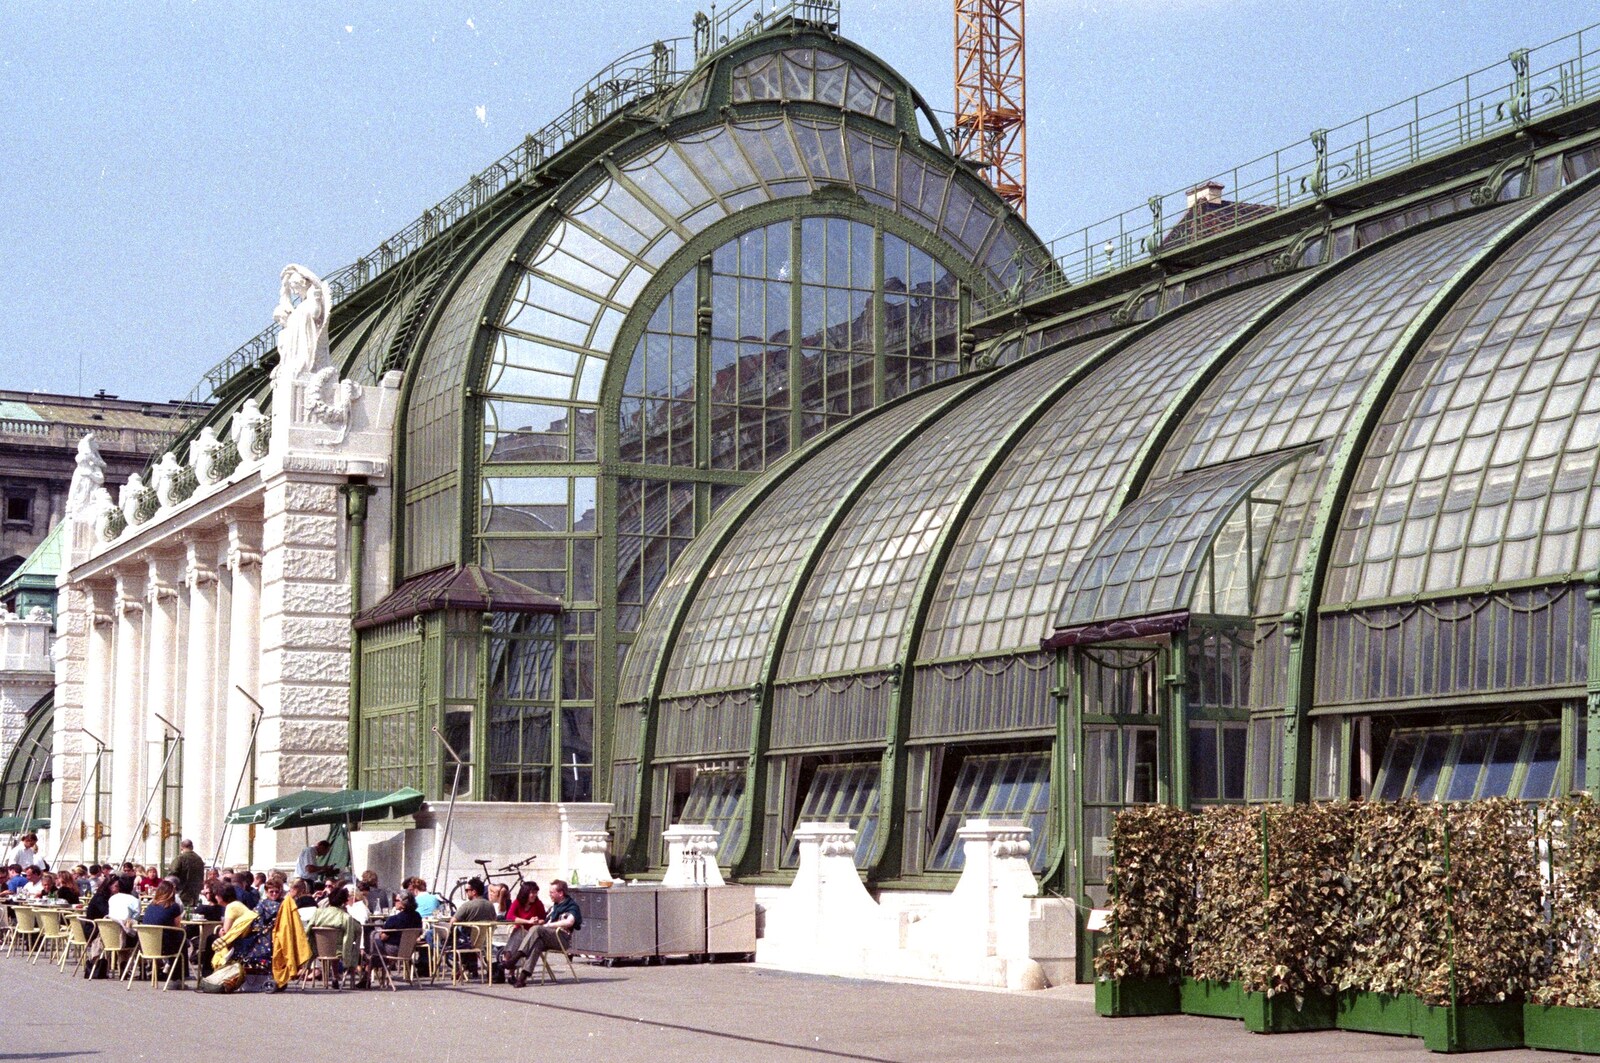 The Palm house at Hofburg Palace from A Postcard From Hofburg Palace, Vienna, Austria - 18th April 2000